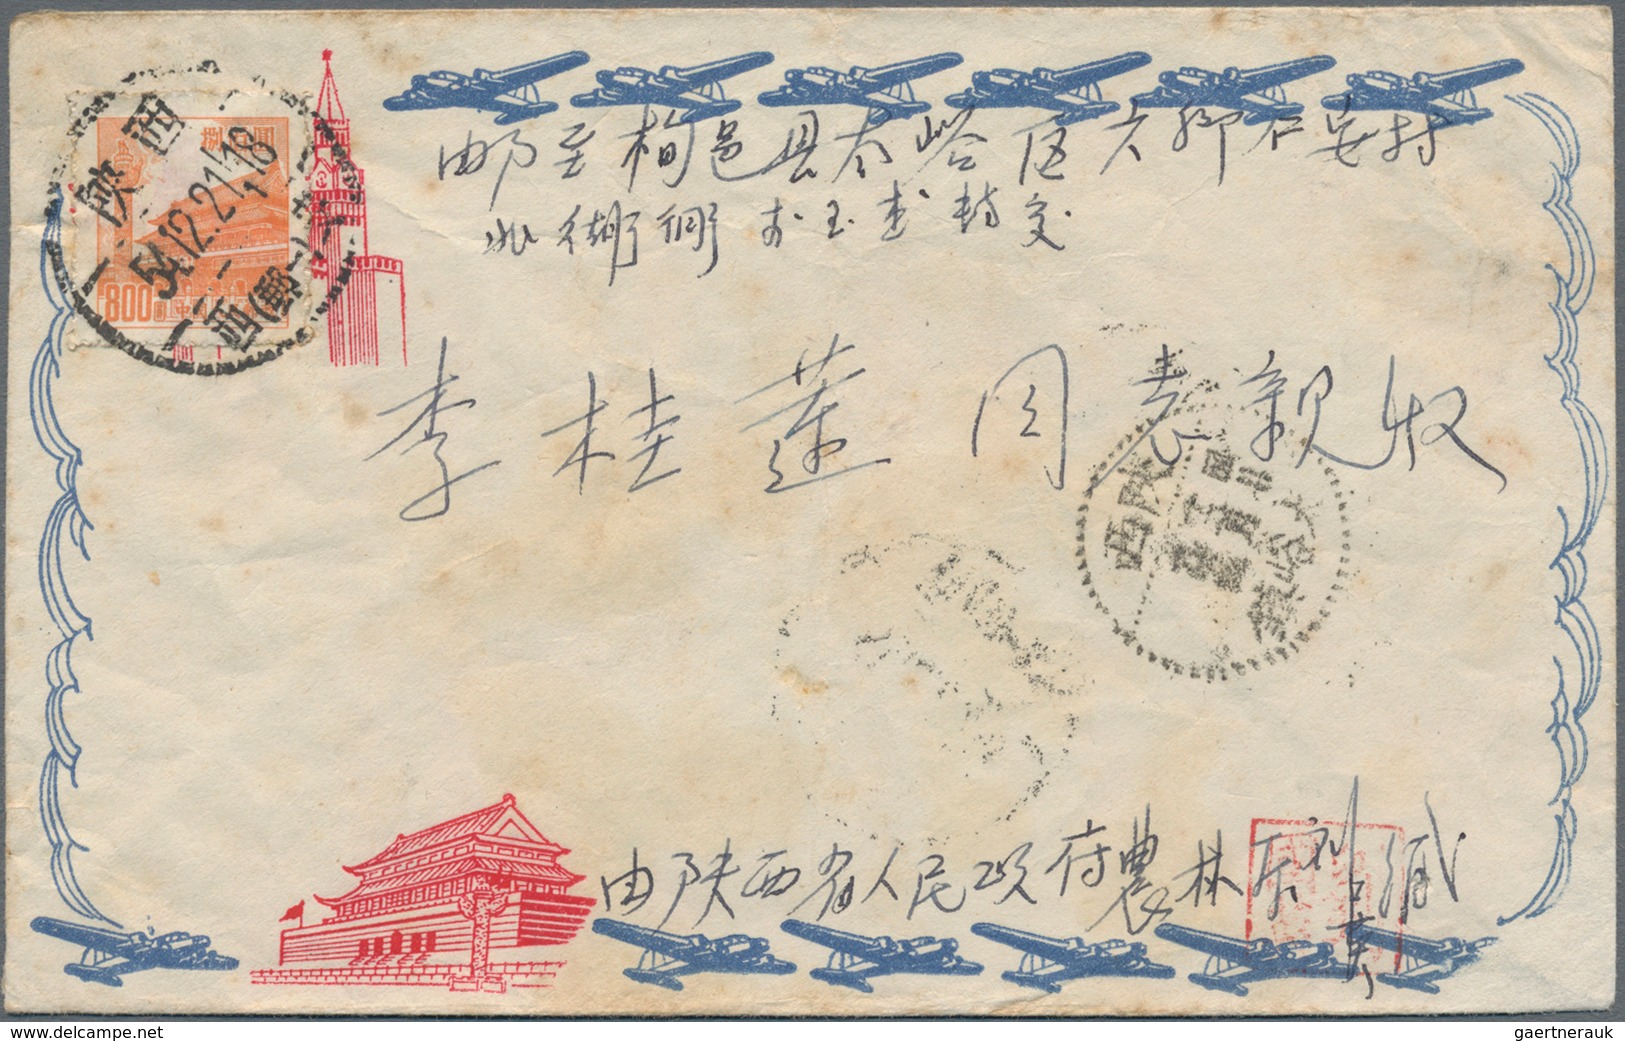 China - Volksrepublik: 1949/54 (ca.), approx. 41 commercial covers bearing the first issues (mostly